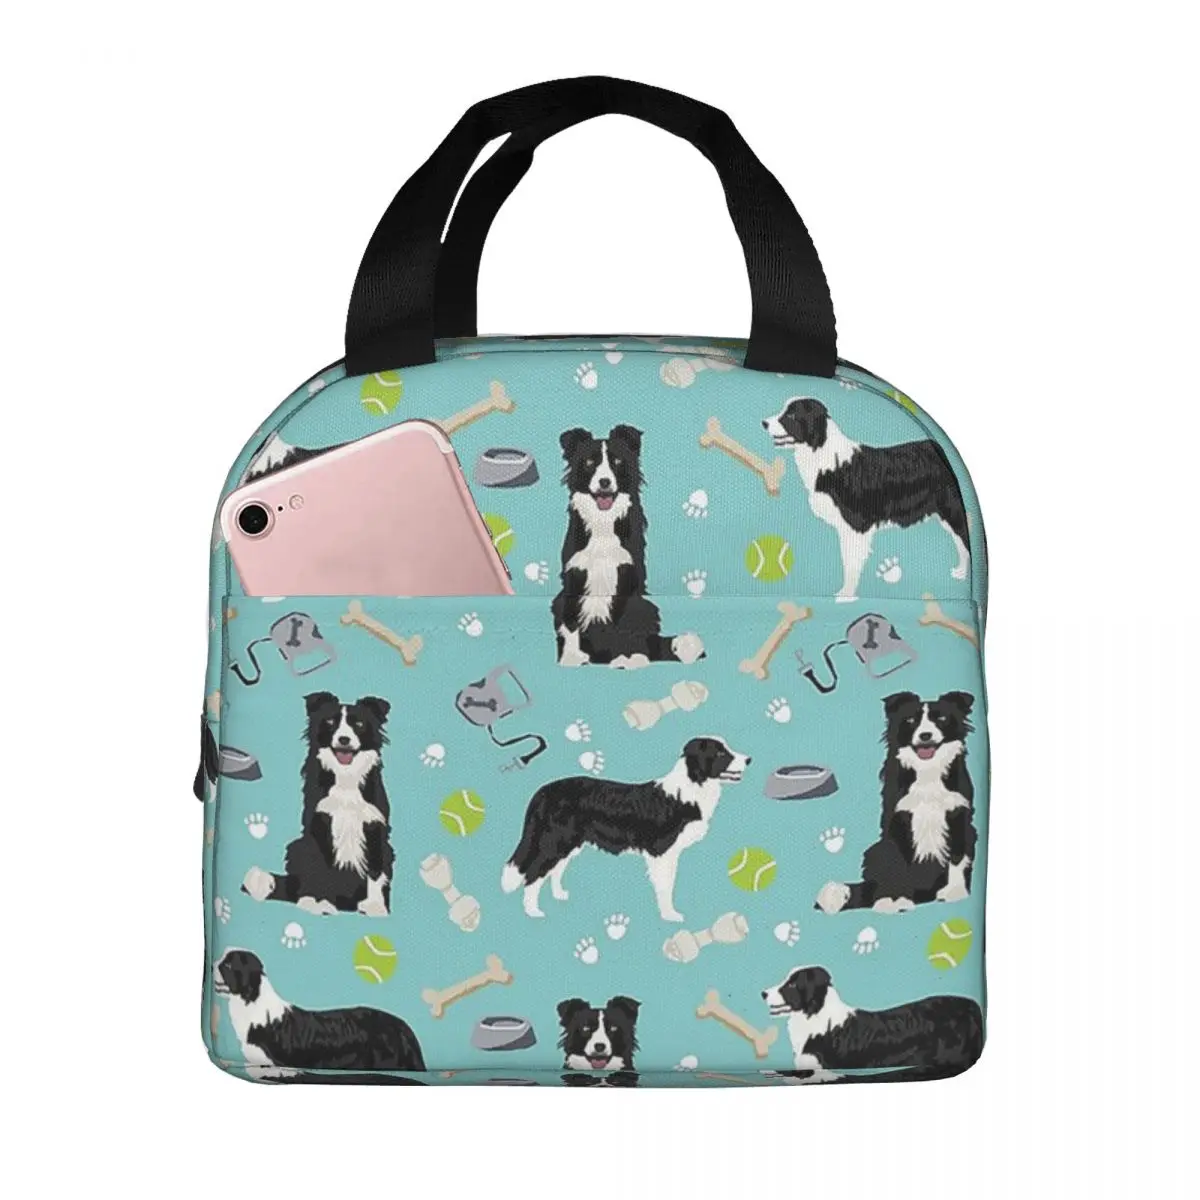 Border Collie Tennis Lunch Bags Portable Insulated Oxford Cooler Bags Dog Thermal Food Picnic Lunch Box for Women Children